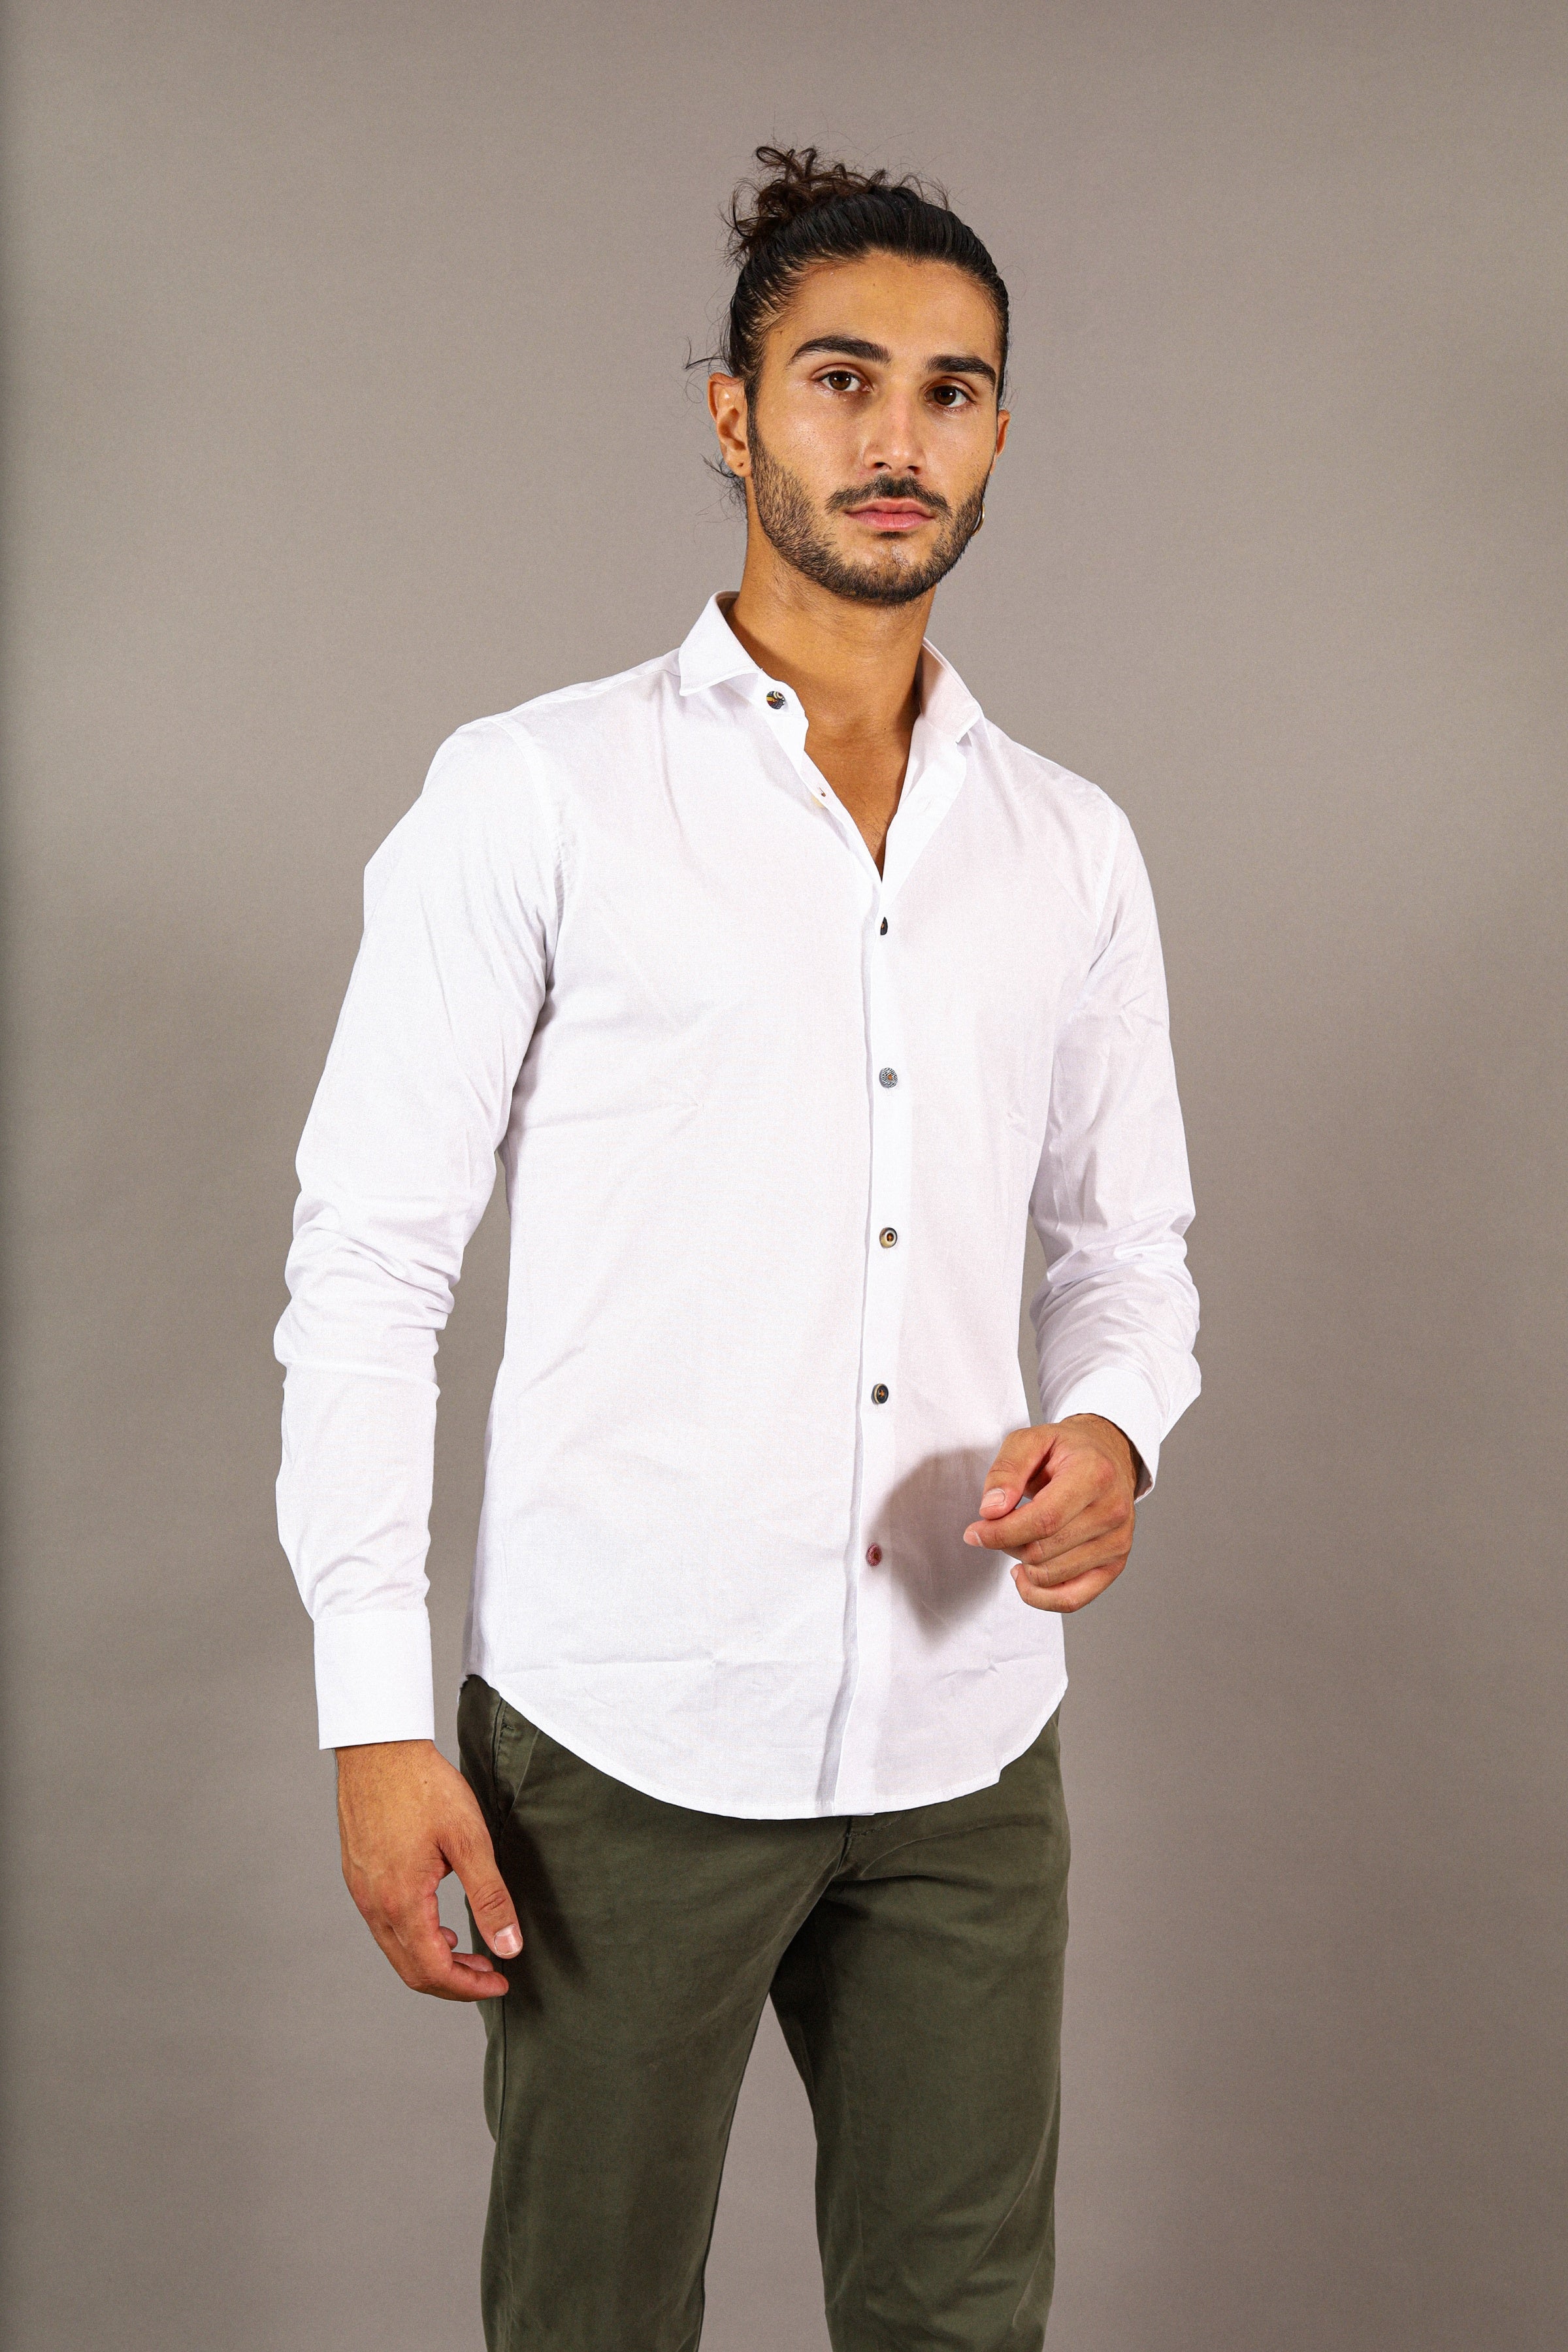 Basic shirt with different buttons - GCM877BS01BIANCO